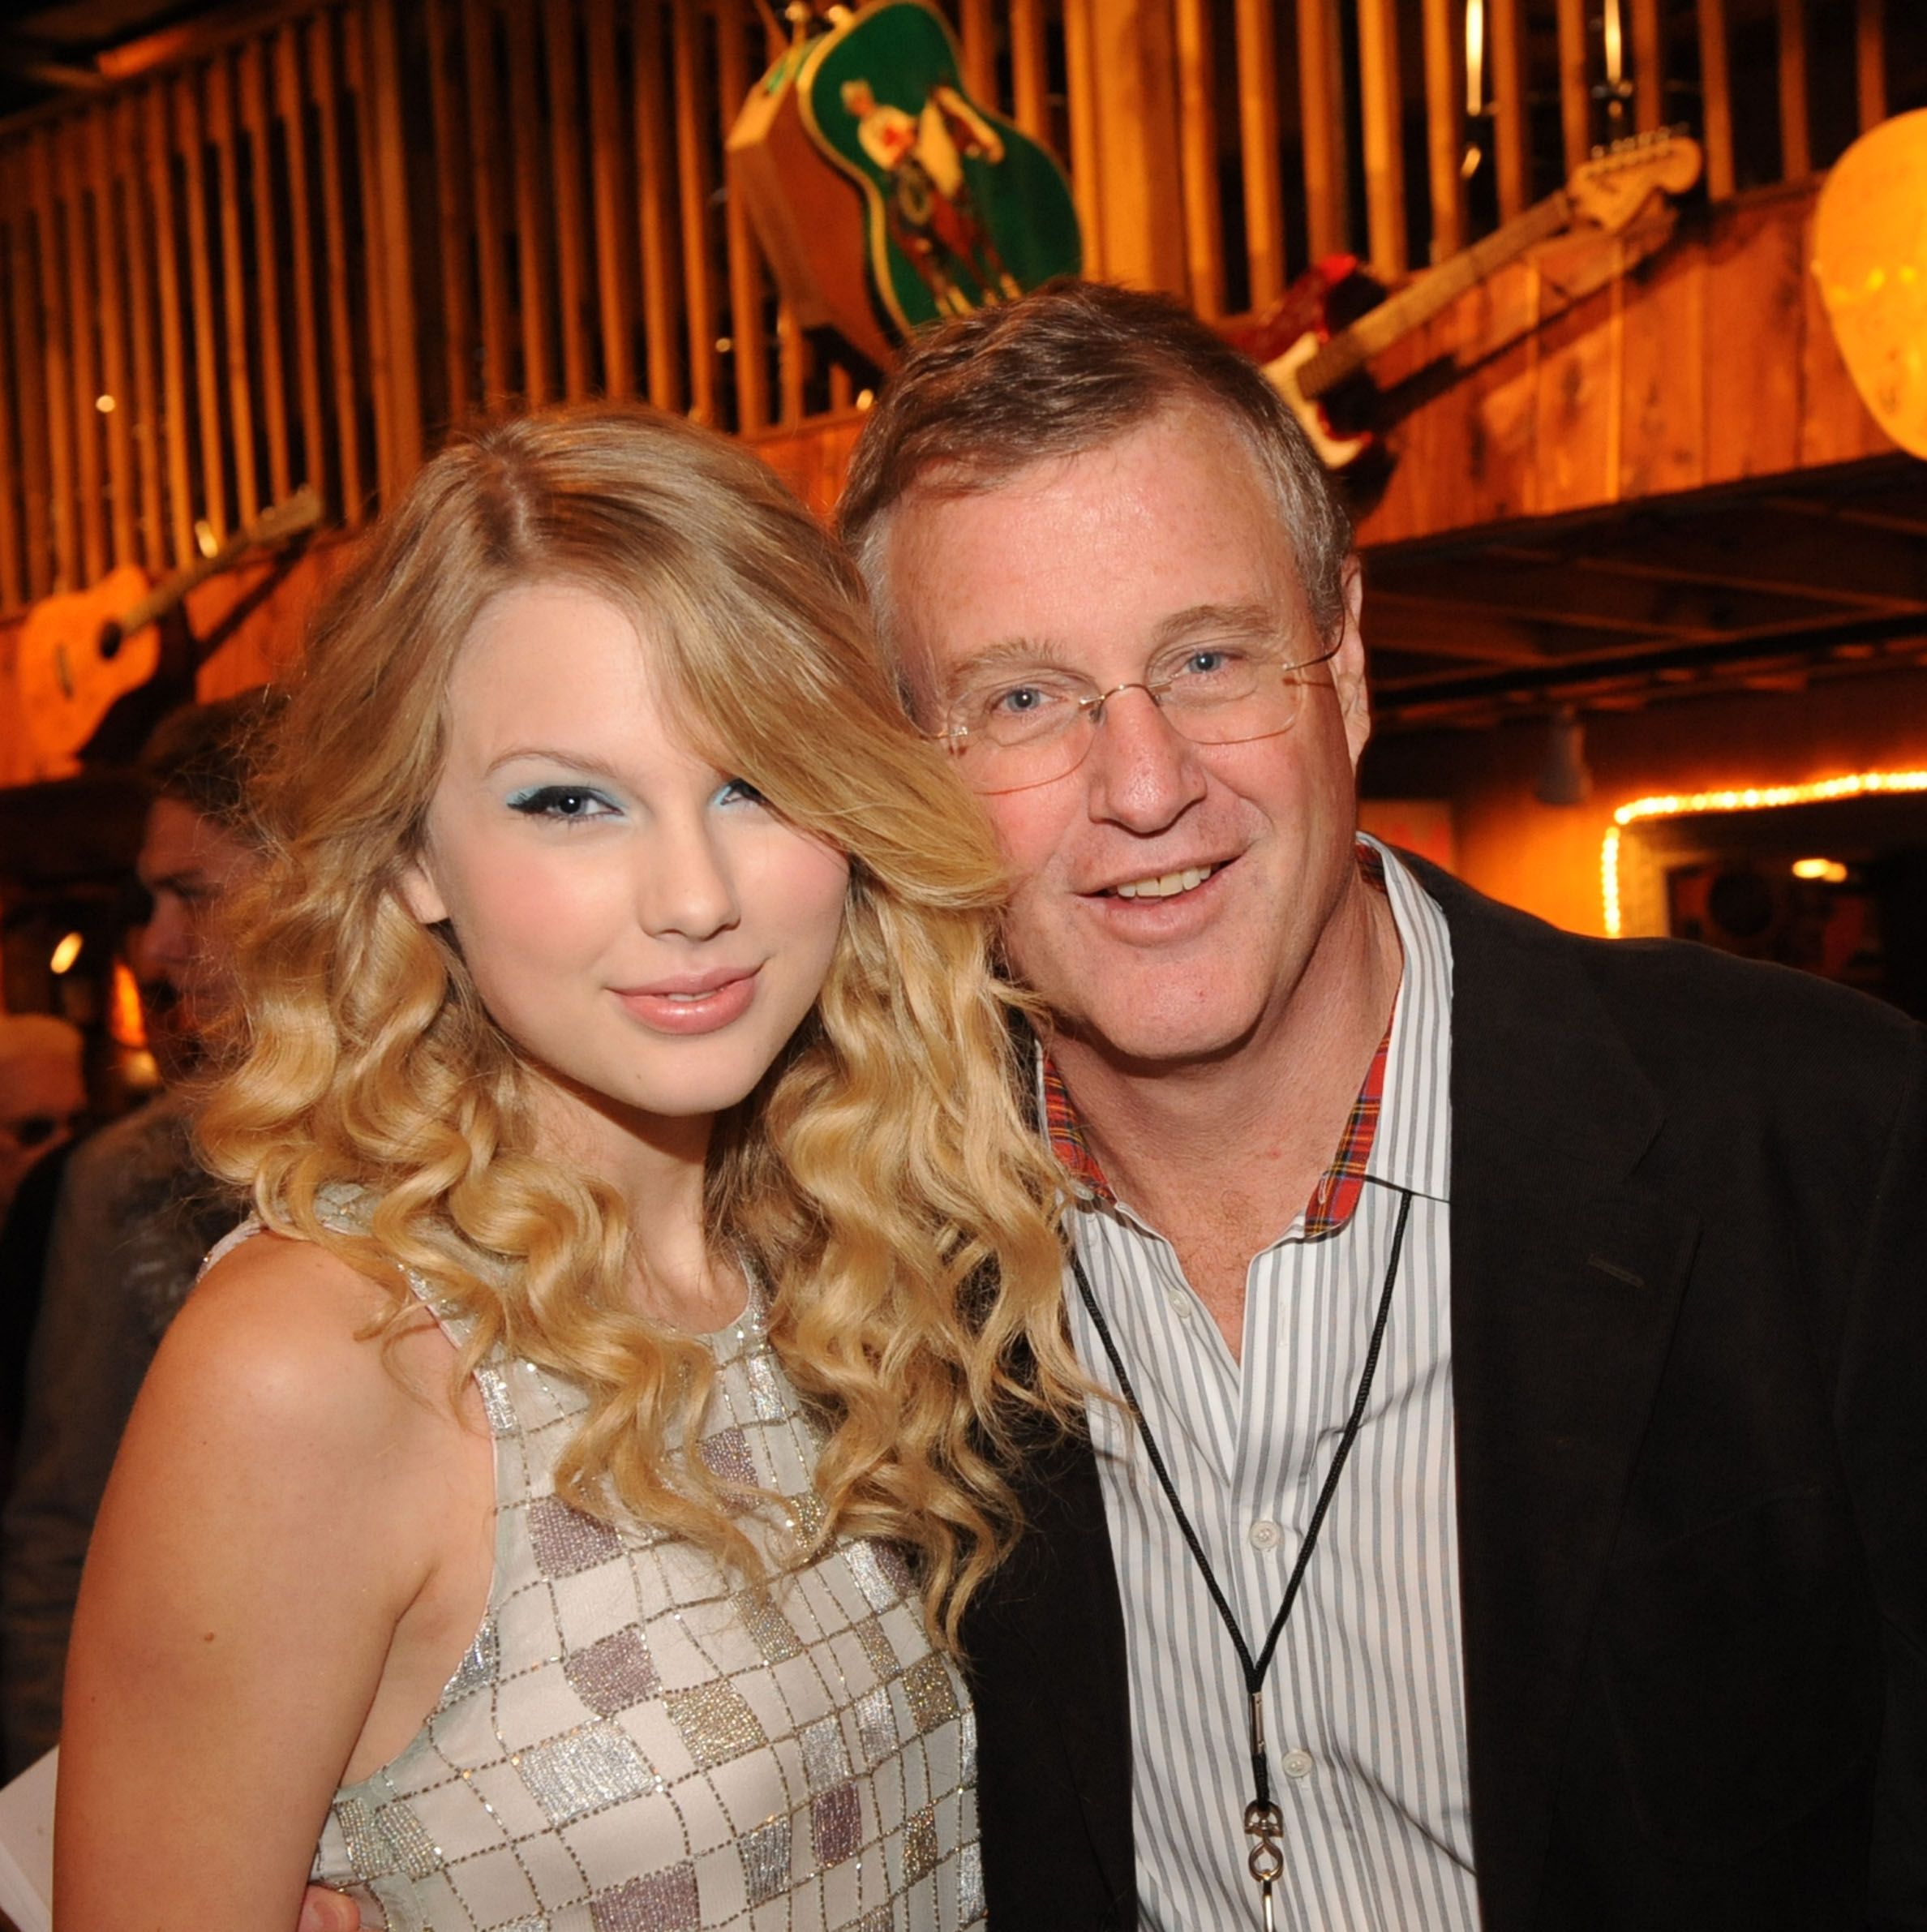 Taylor Swift's Rep Releases Statement Following Alleged Altercation Between Scott Swift and a Pap